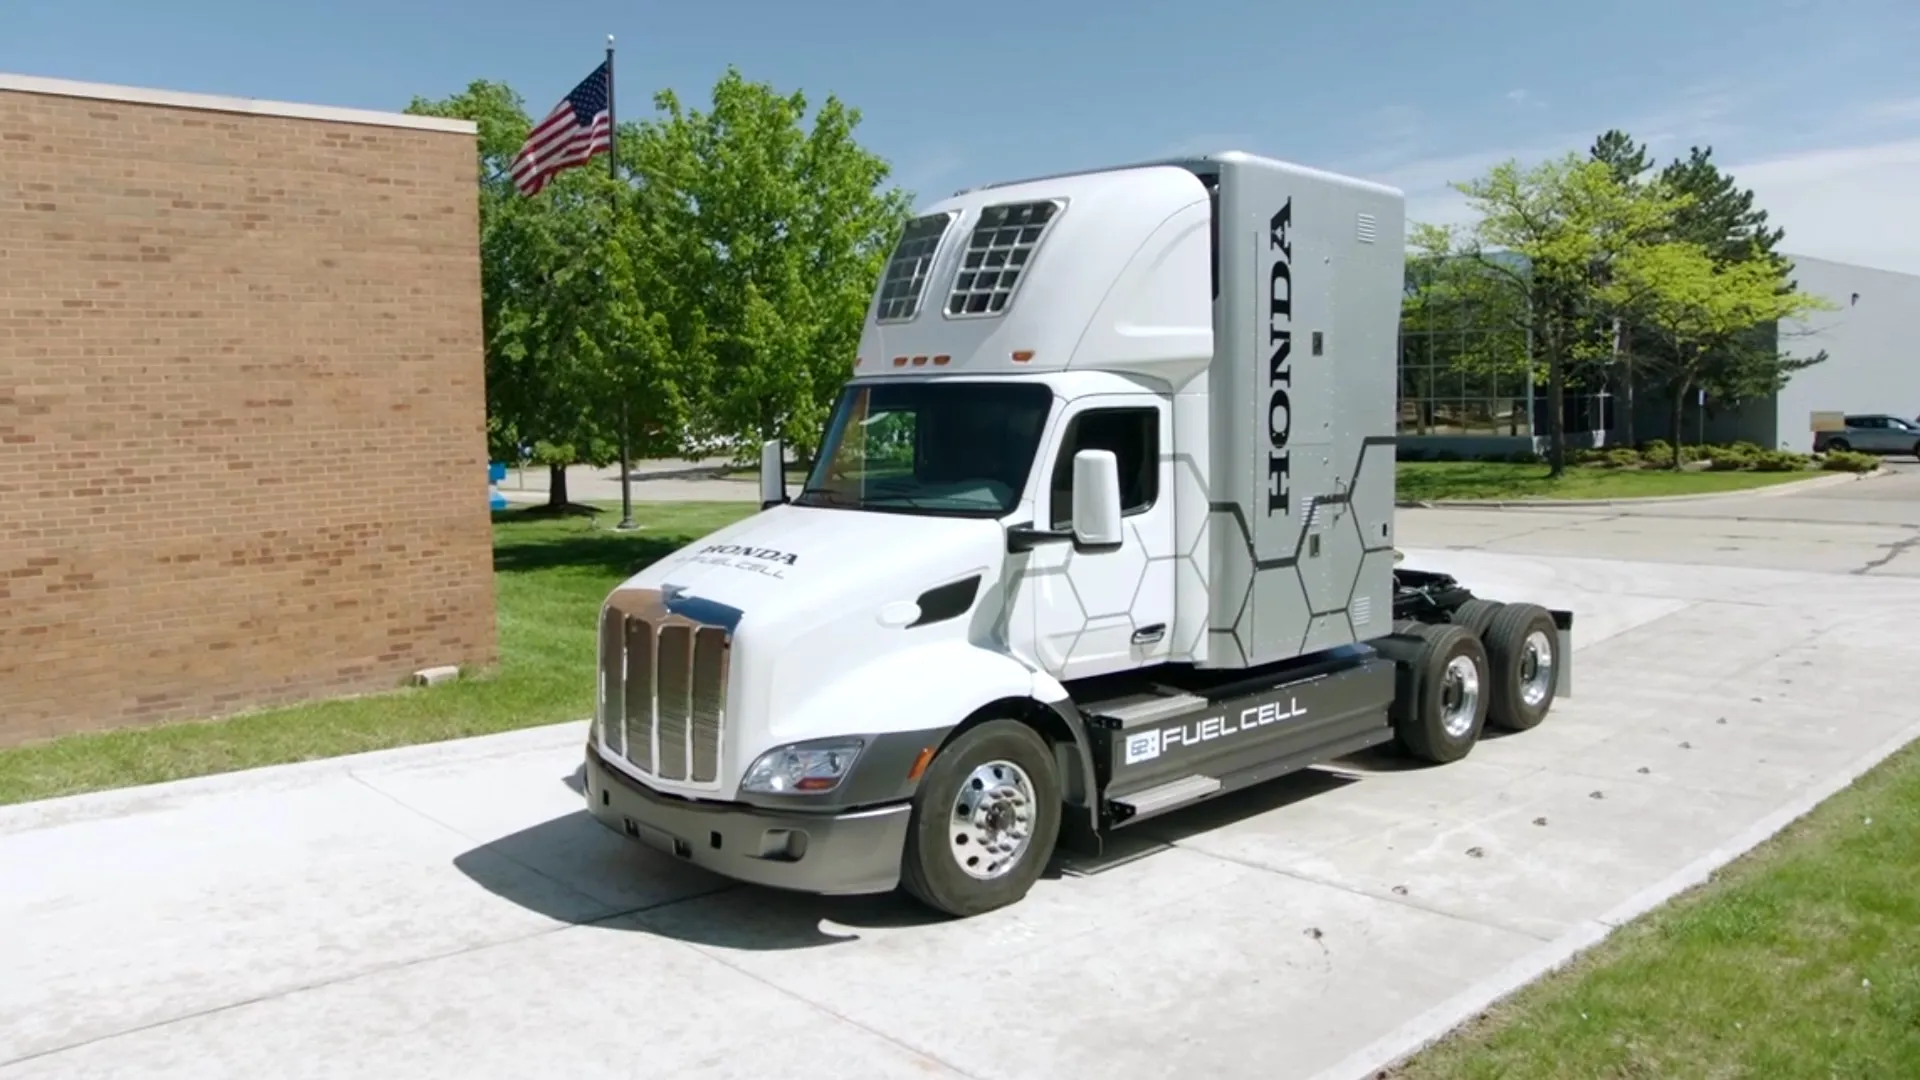 Honda fuel-cell semi project bows, banks on hydrogen business – Green Car Reports